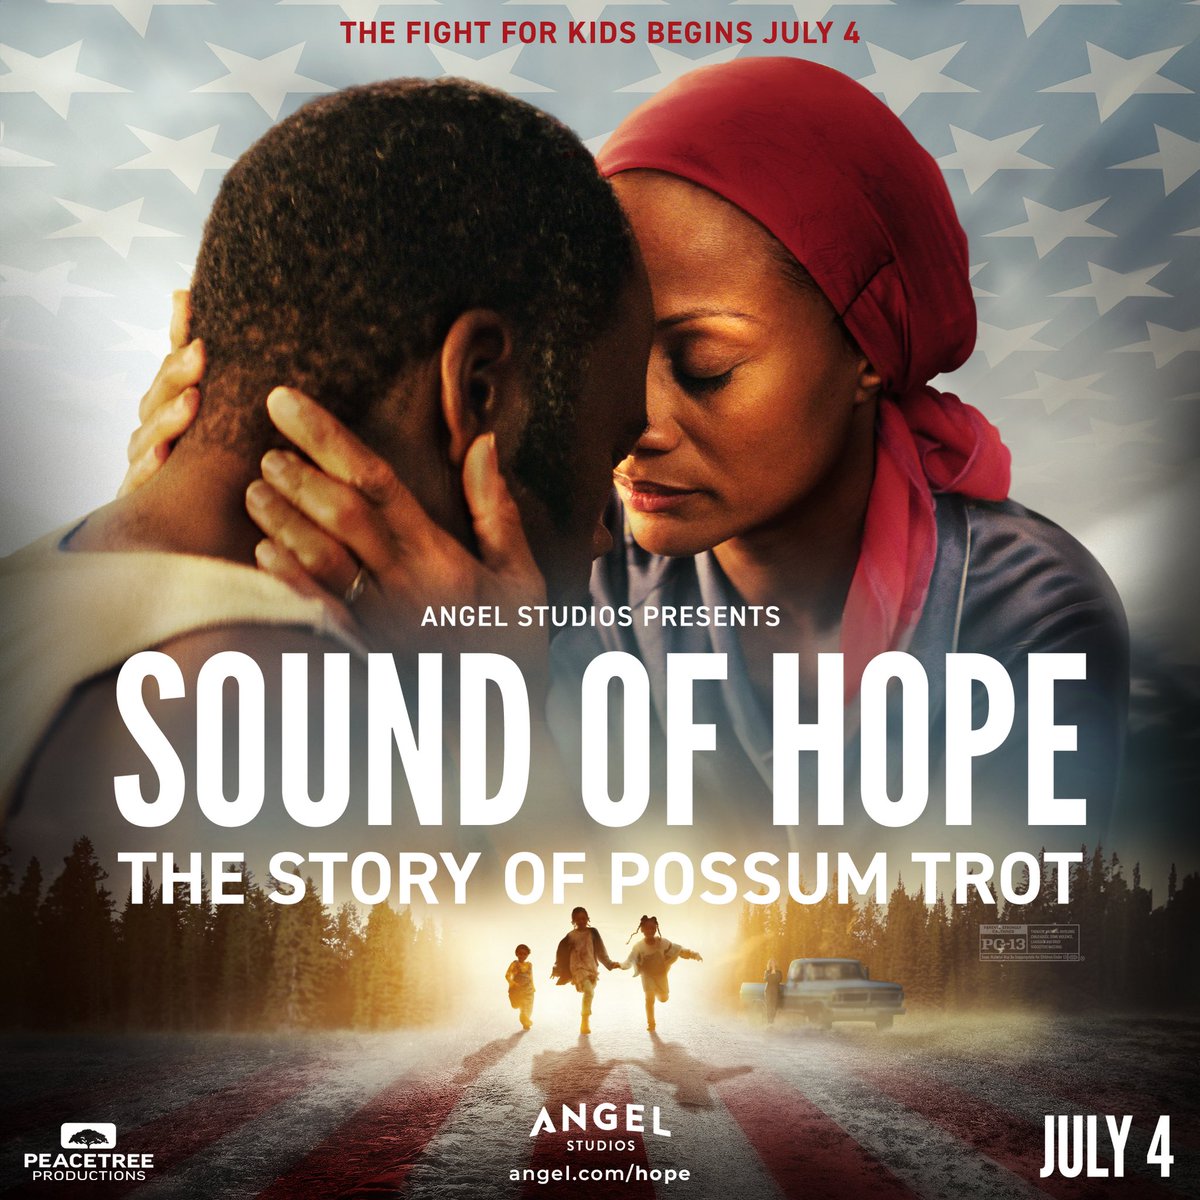 The fight for kids begins. Sound of Hope: The Story of Possum Trot releases in theaters starting July 4. Join the movement at angel.com/hope #SoundOfHope #SoundOfHopeMovie #PossumTrot #PossumTrotMovie #FightForKids #July4